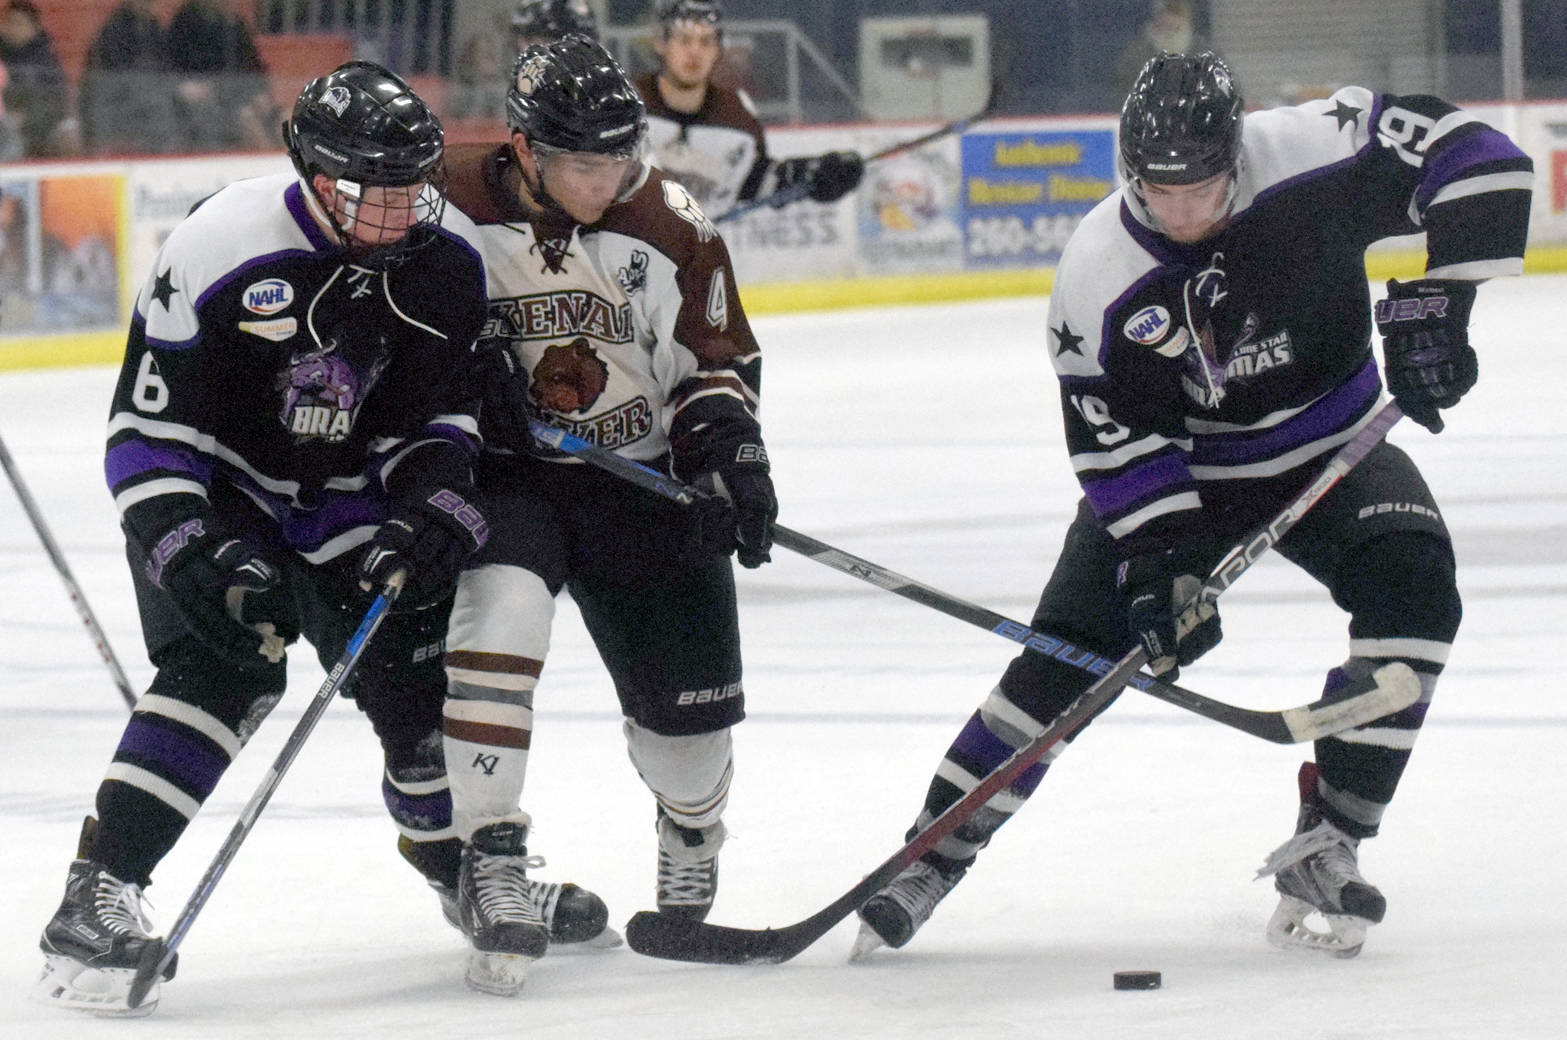 Kenai River’s Sacha Guillemain battles Wyatt Mathews and Ture Linden of the Lone Star (Texas) Brahmas for the puck Friday, Jan. 19, 2018, at the Soldotna Regional Sports Complex. (Photo by Jeff Helminiak/Peninsula Clarion)